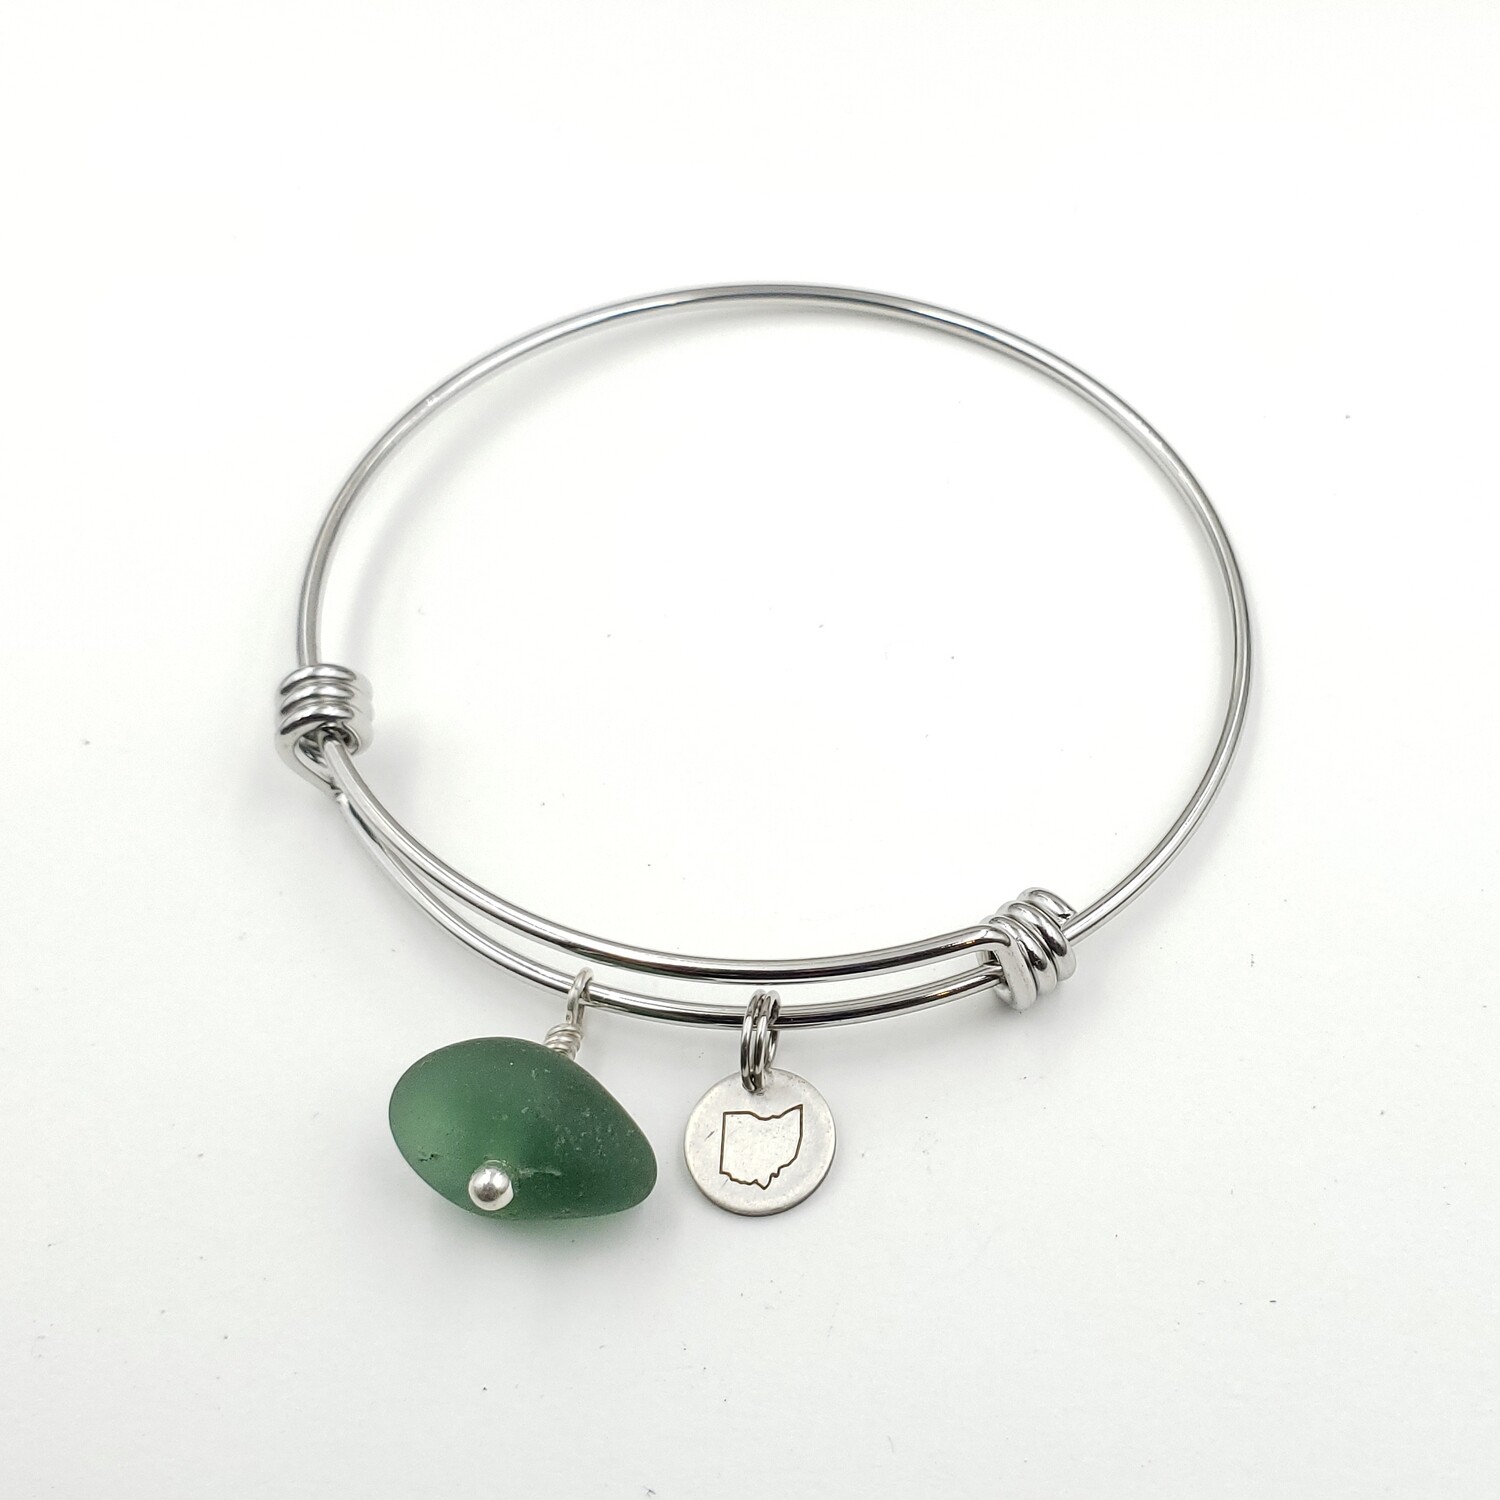 Bangle Bracelet with Stamped State of Ohio Charm and olive green Lake Erie Beach Glass